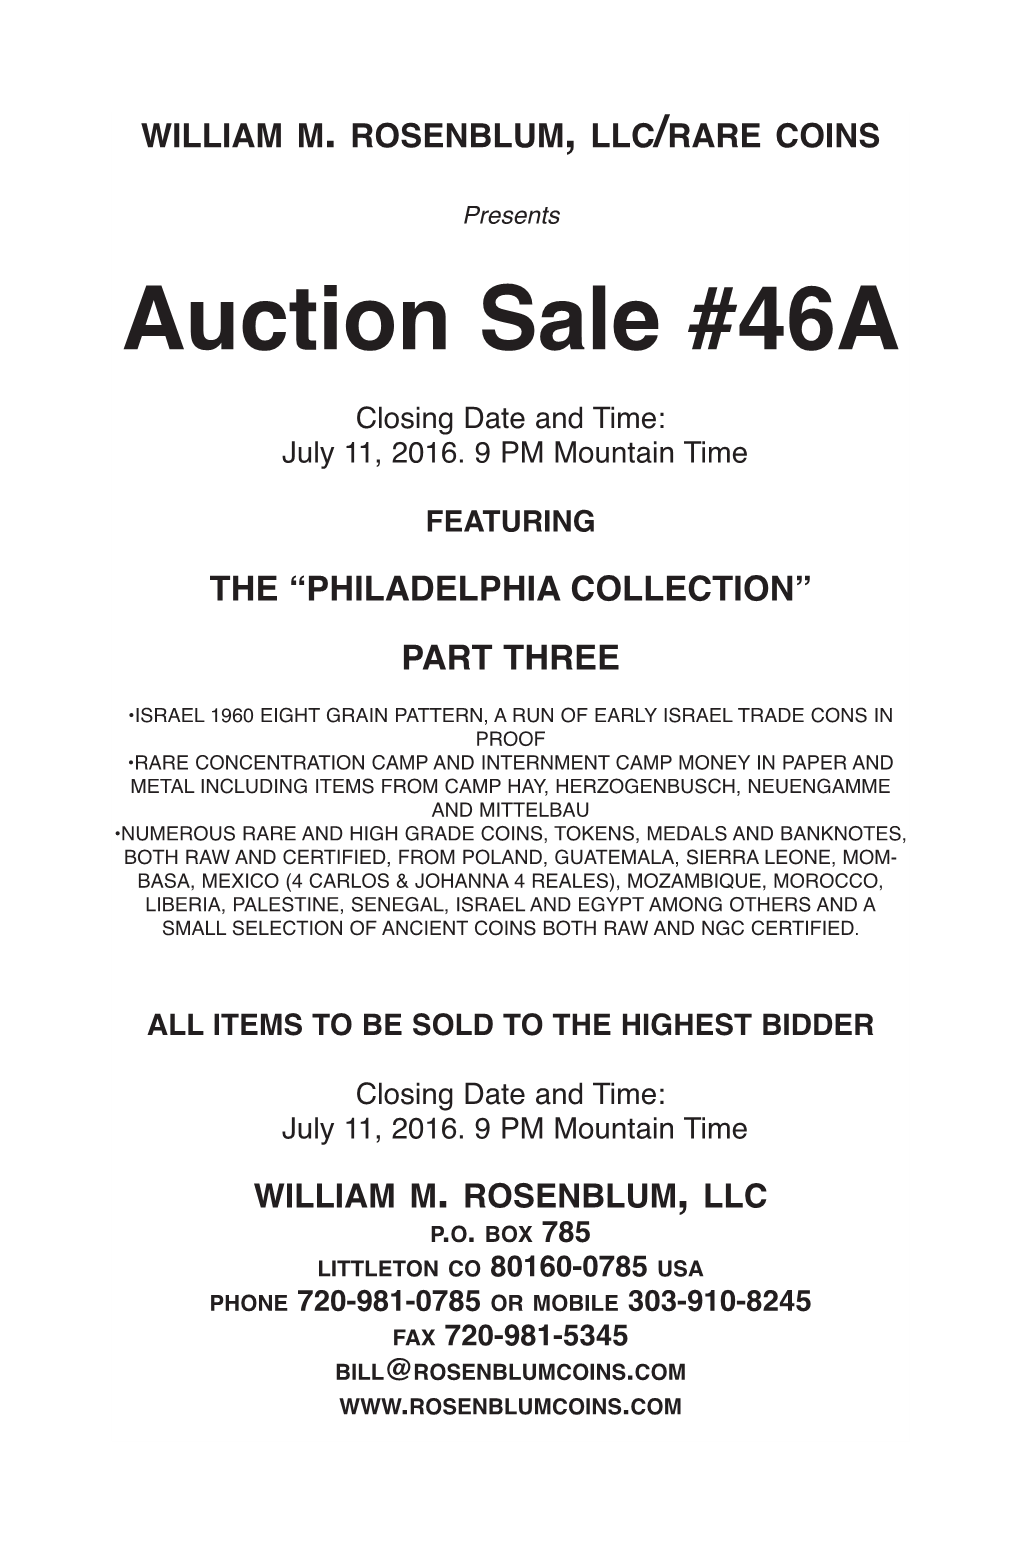 Auction Sale #46A Closing Date and Time: July 11, 2016